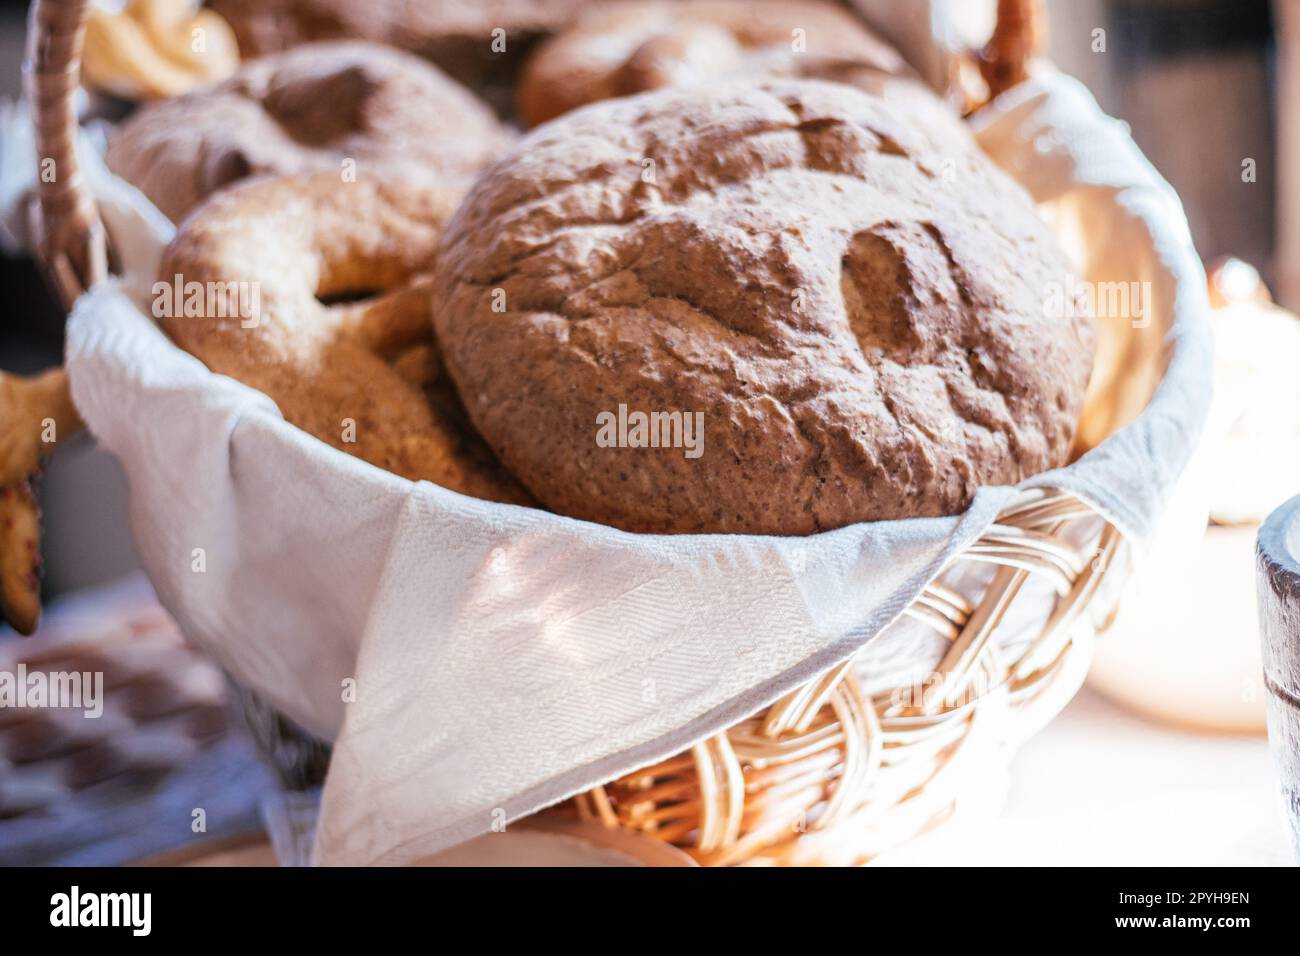 Delicious gourmet fresh baked goods buns, pone, fancy rye bread, pastry in napkin woven basket on blurred background. Stock Photo